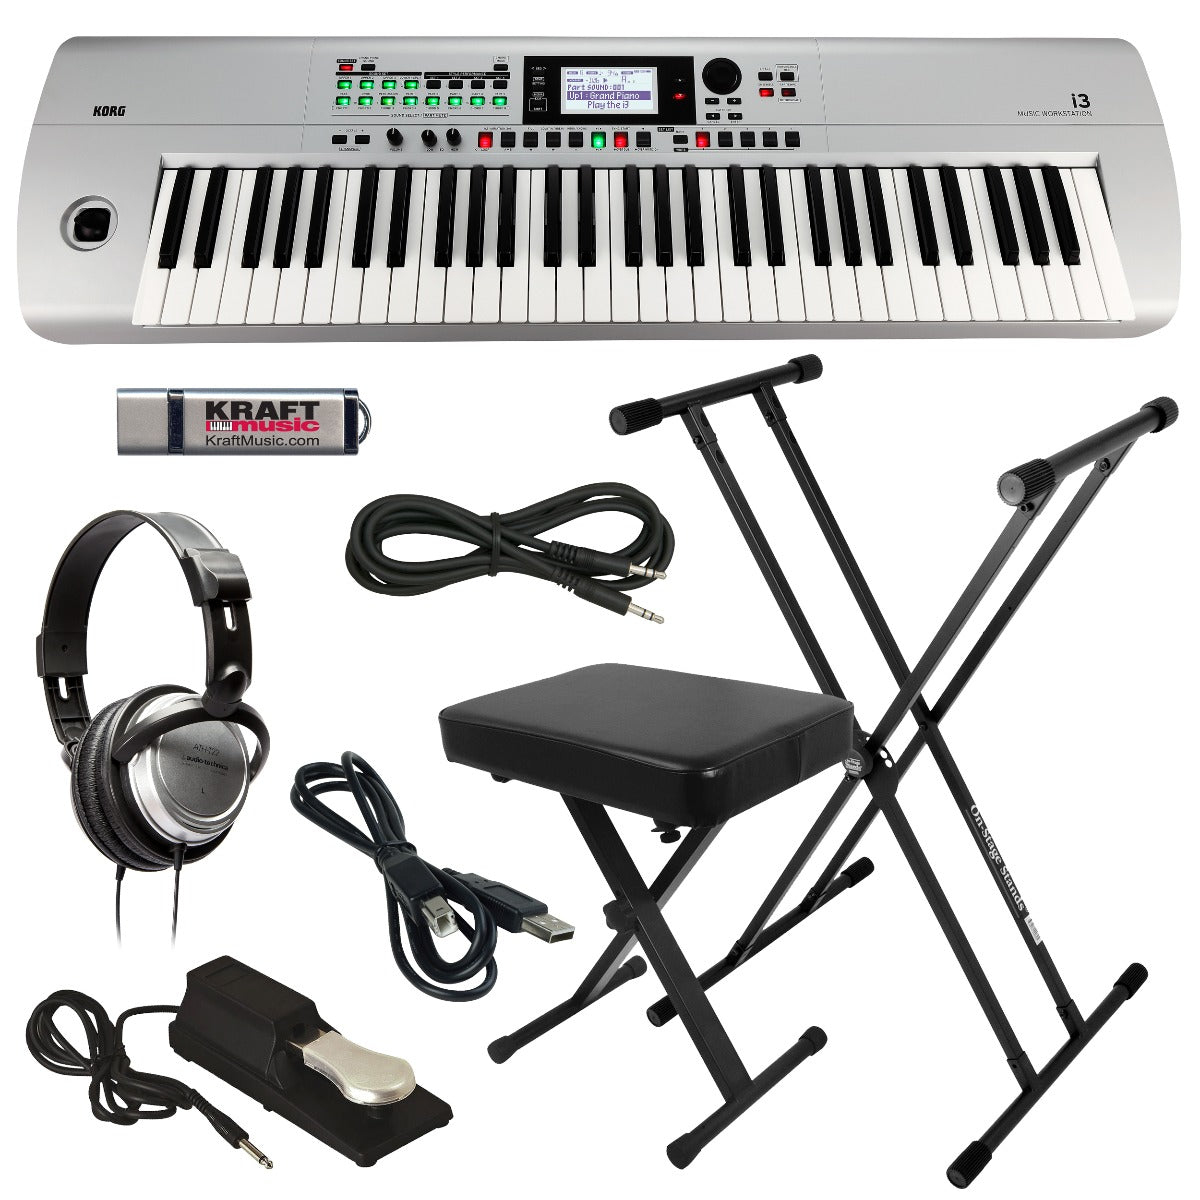 Korg i3 in Matte Silver with included accessories